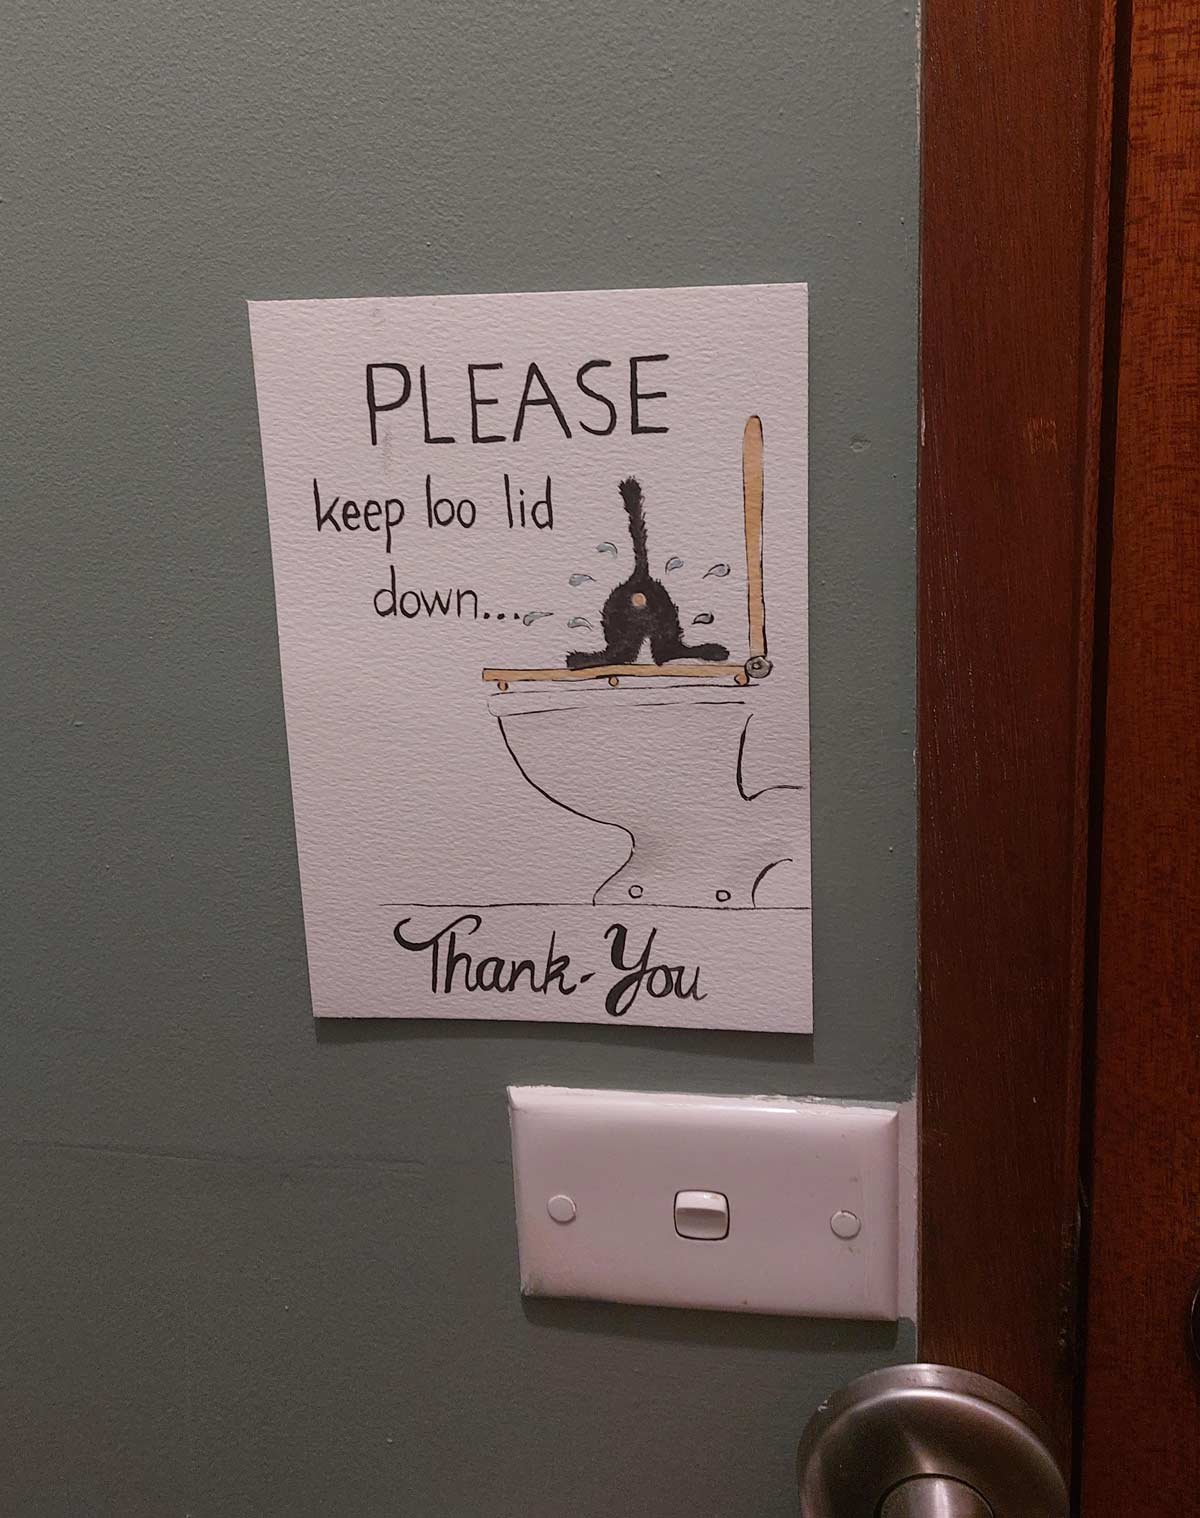 Our cat loves to play in the toilet water, so my mum made a sign to remind guests to close the lid after use